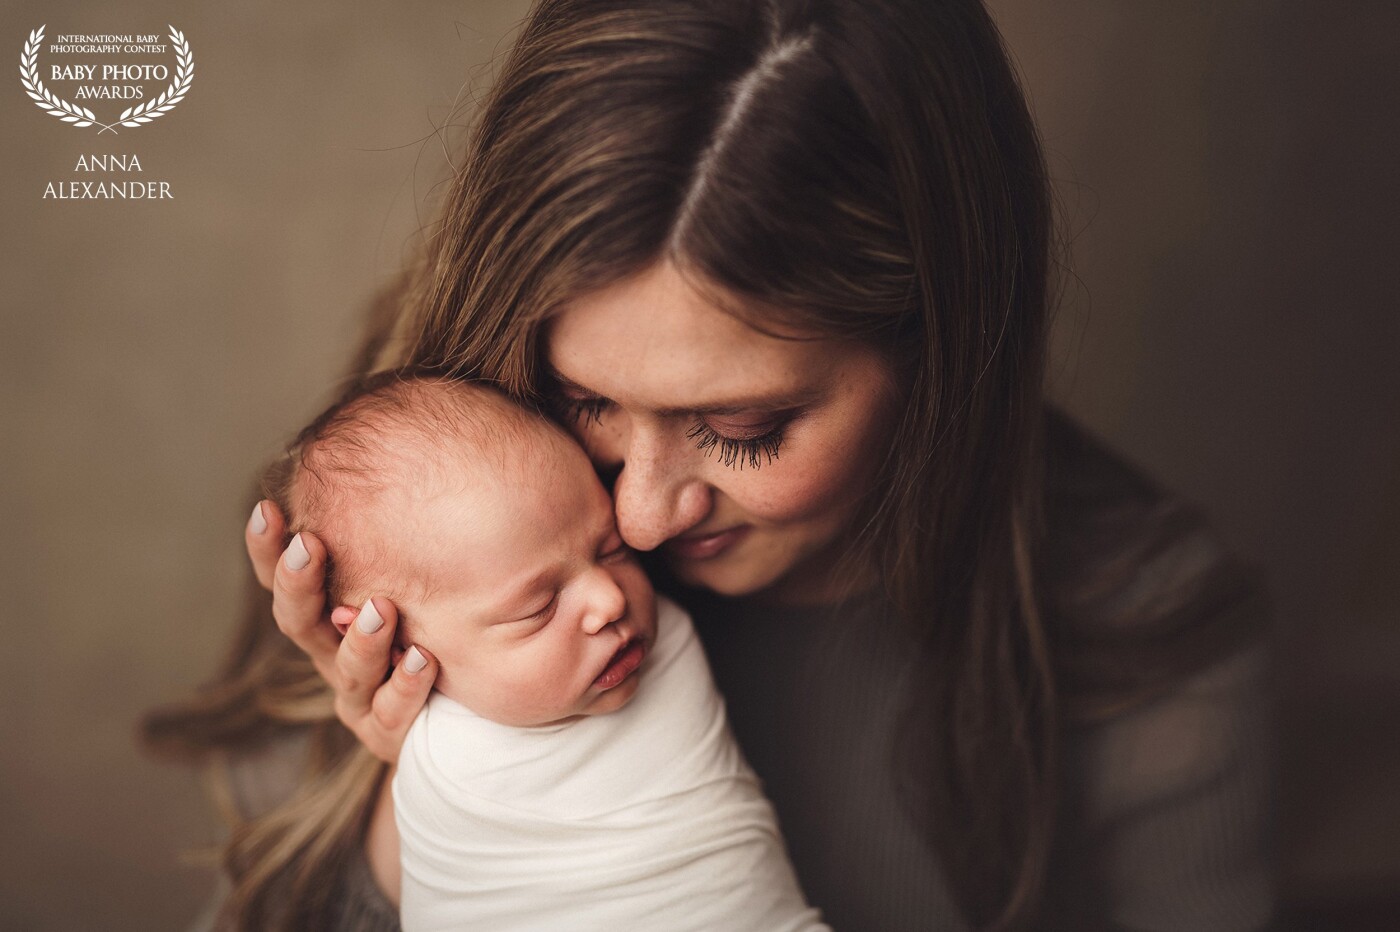 There is nothing like a mother and a baby connection. It inspires me the most and is sure my favourite thing to photograph.  It's timeless and universal for every culture.